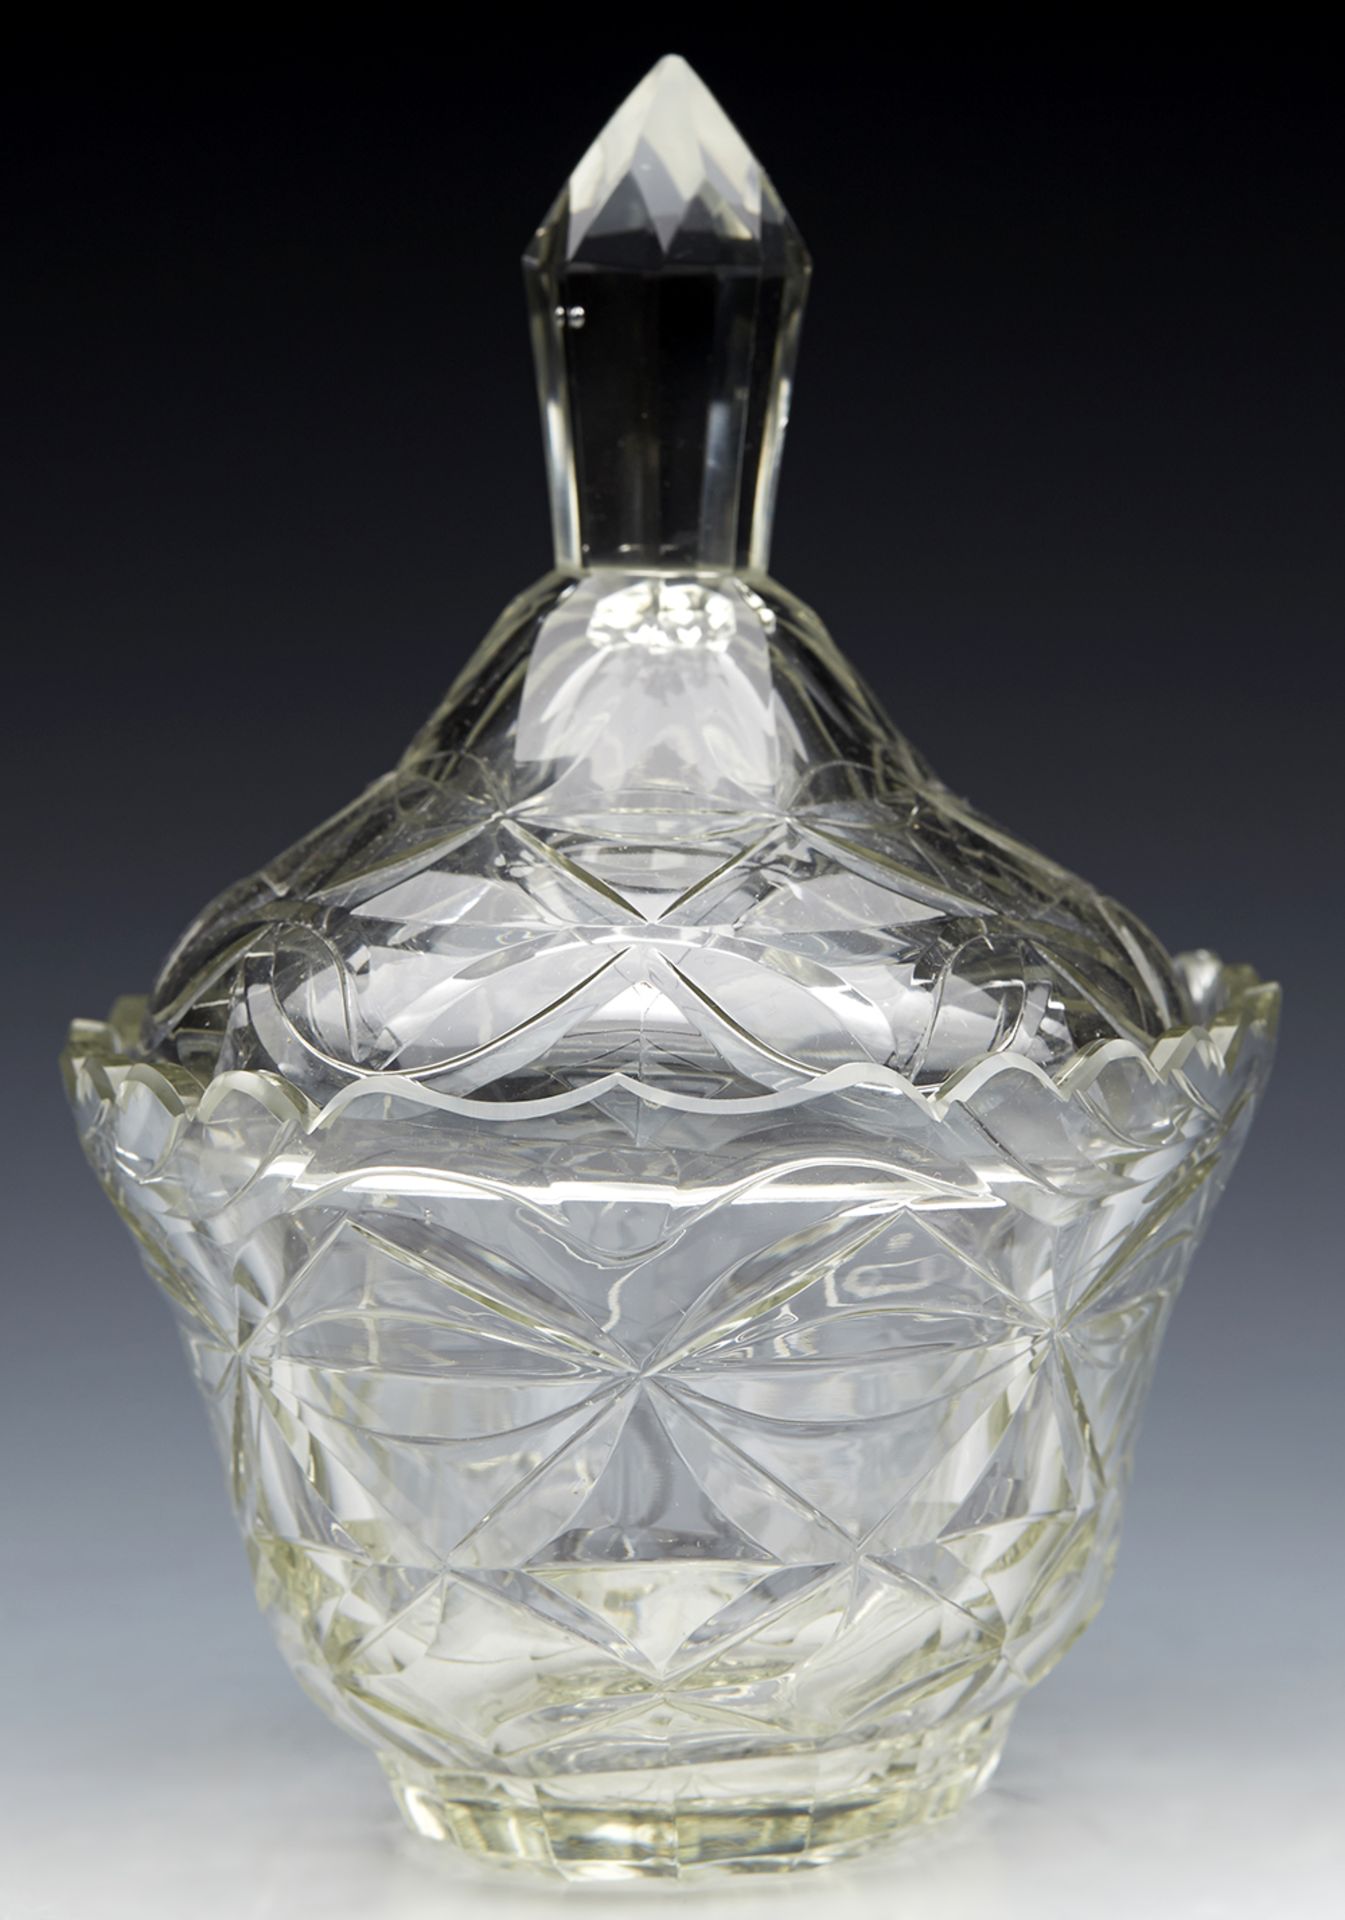 ANTIQUE CUT GLASS LIDDED BUTTER DISH AND STAND EARLY 19TH C.   DIMENSIONS   Height 19cm, Length 25, - Image 2 of 15